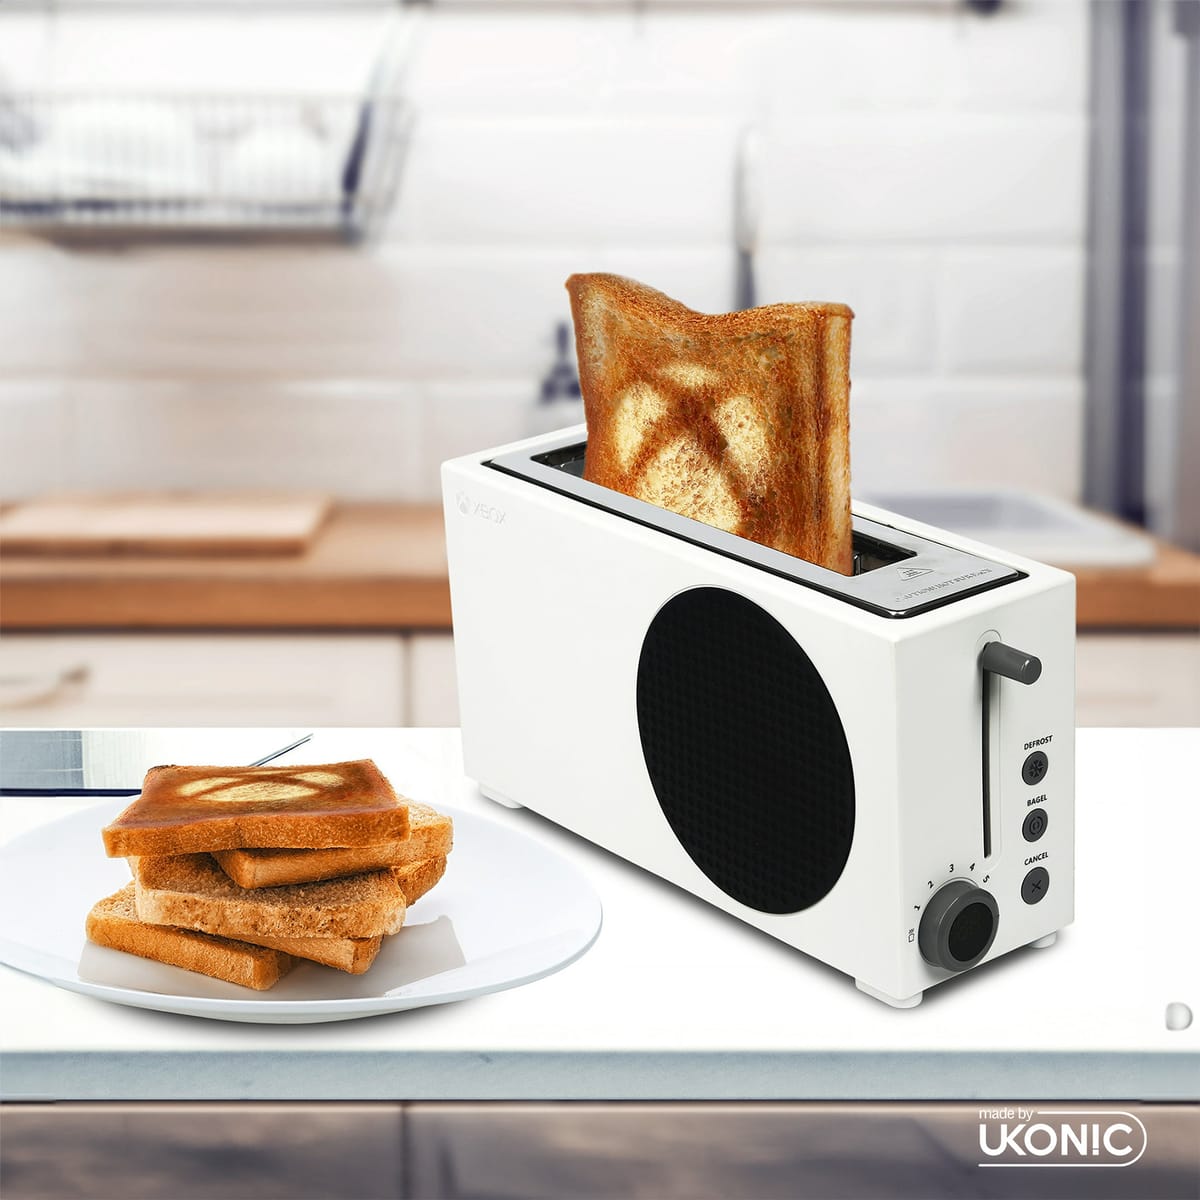 The Xbox Series S Toaster